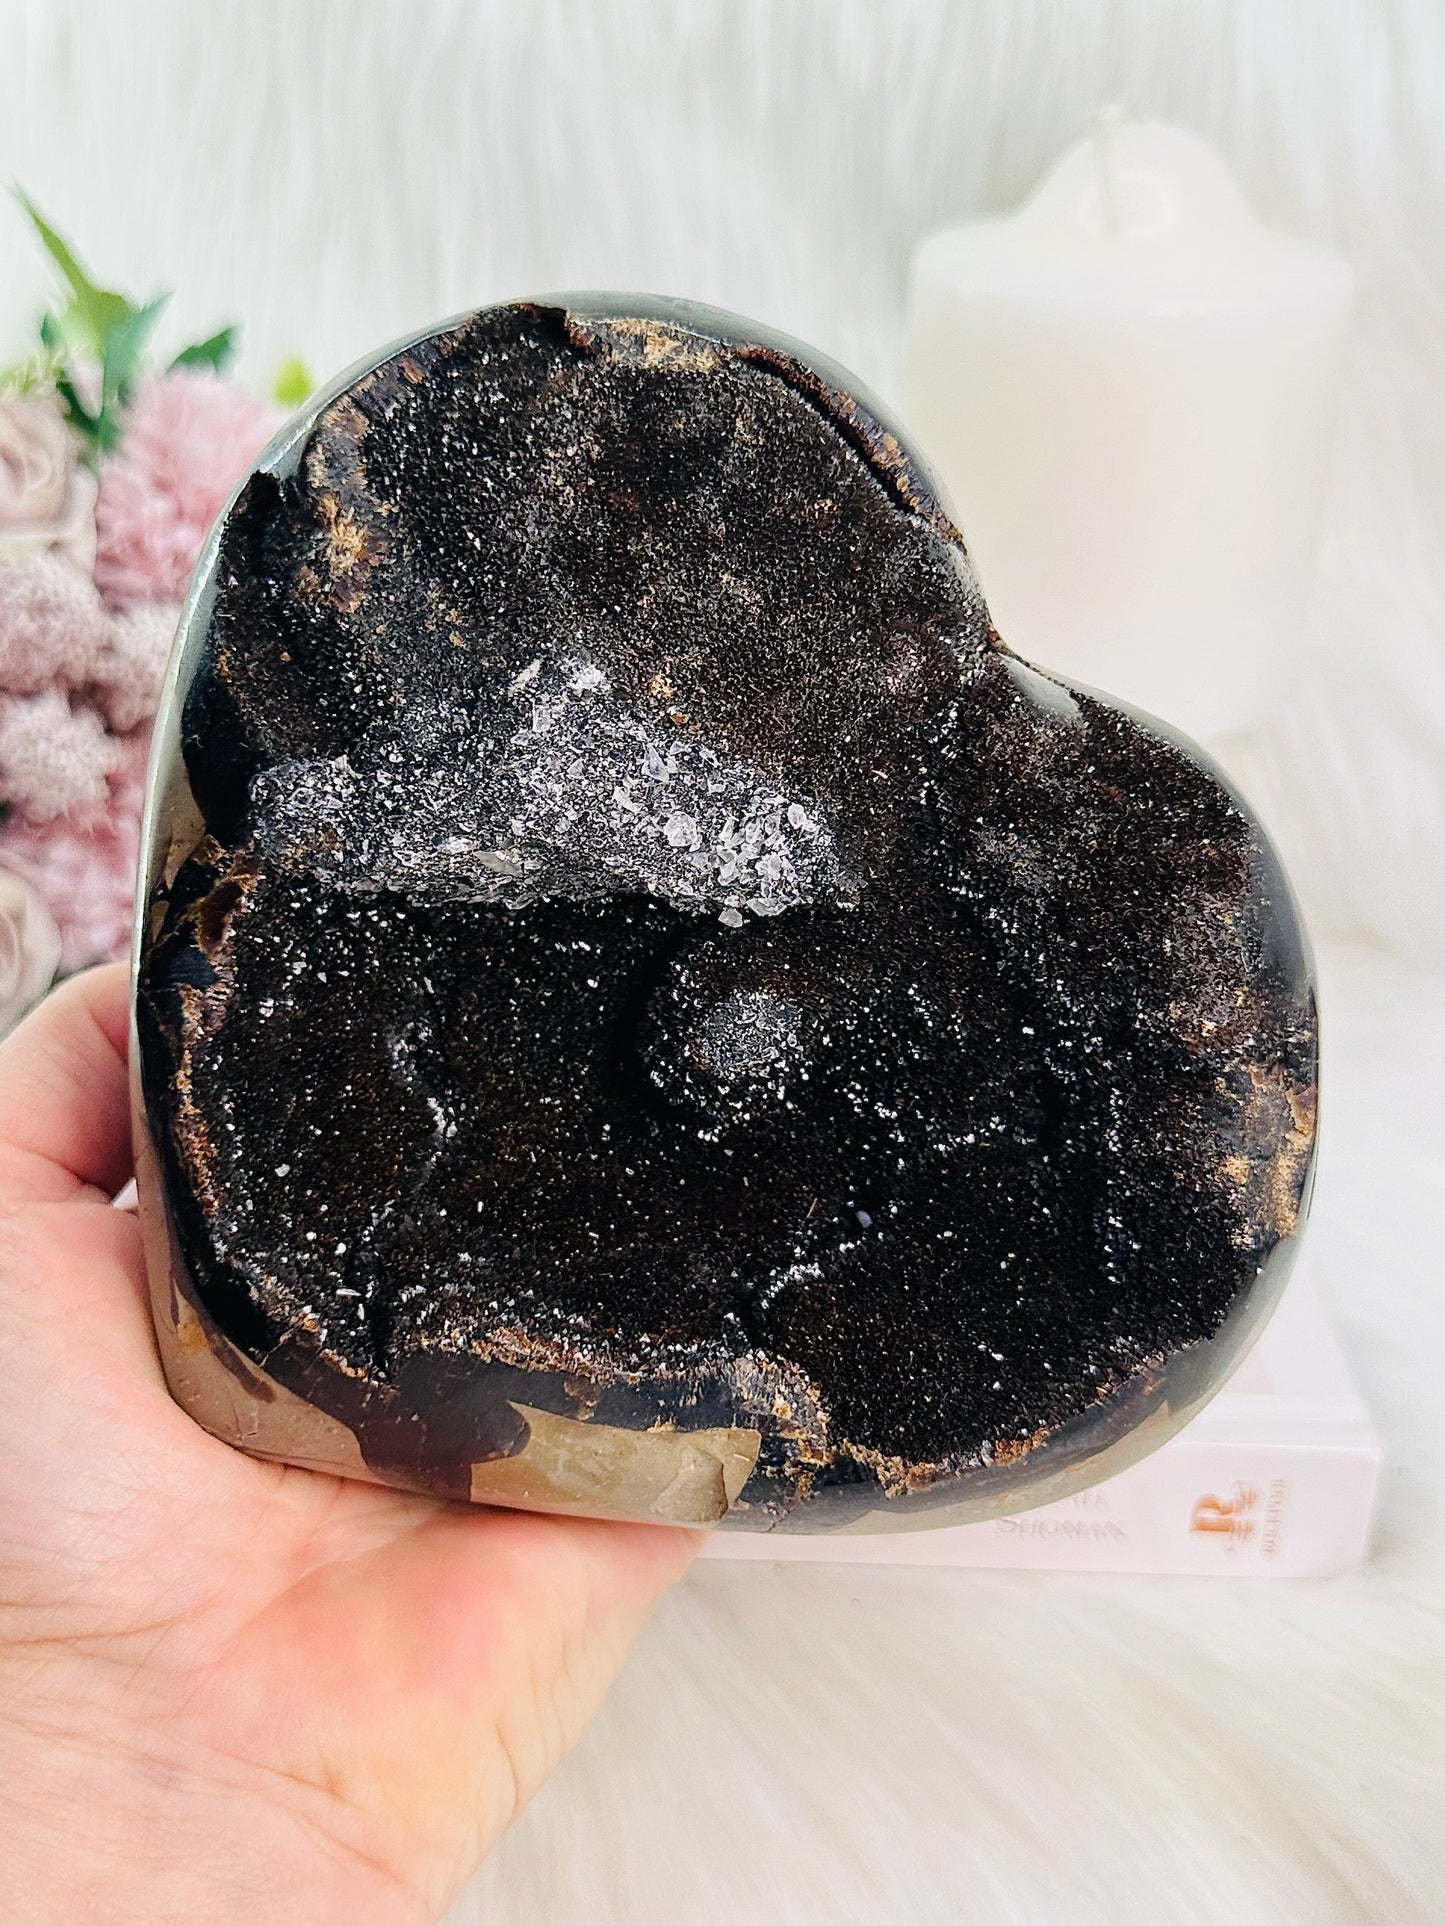 ⚜️ SALE ⚜️Absolutely Fabulous Huge 1.67KG Druzy Septarian Carved Heart